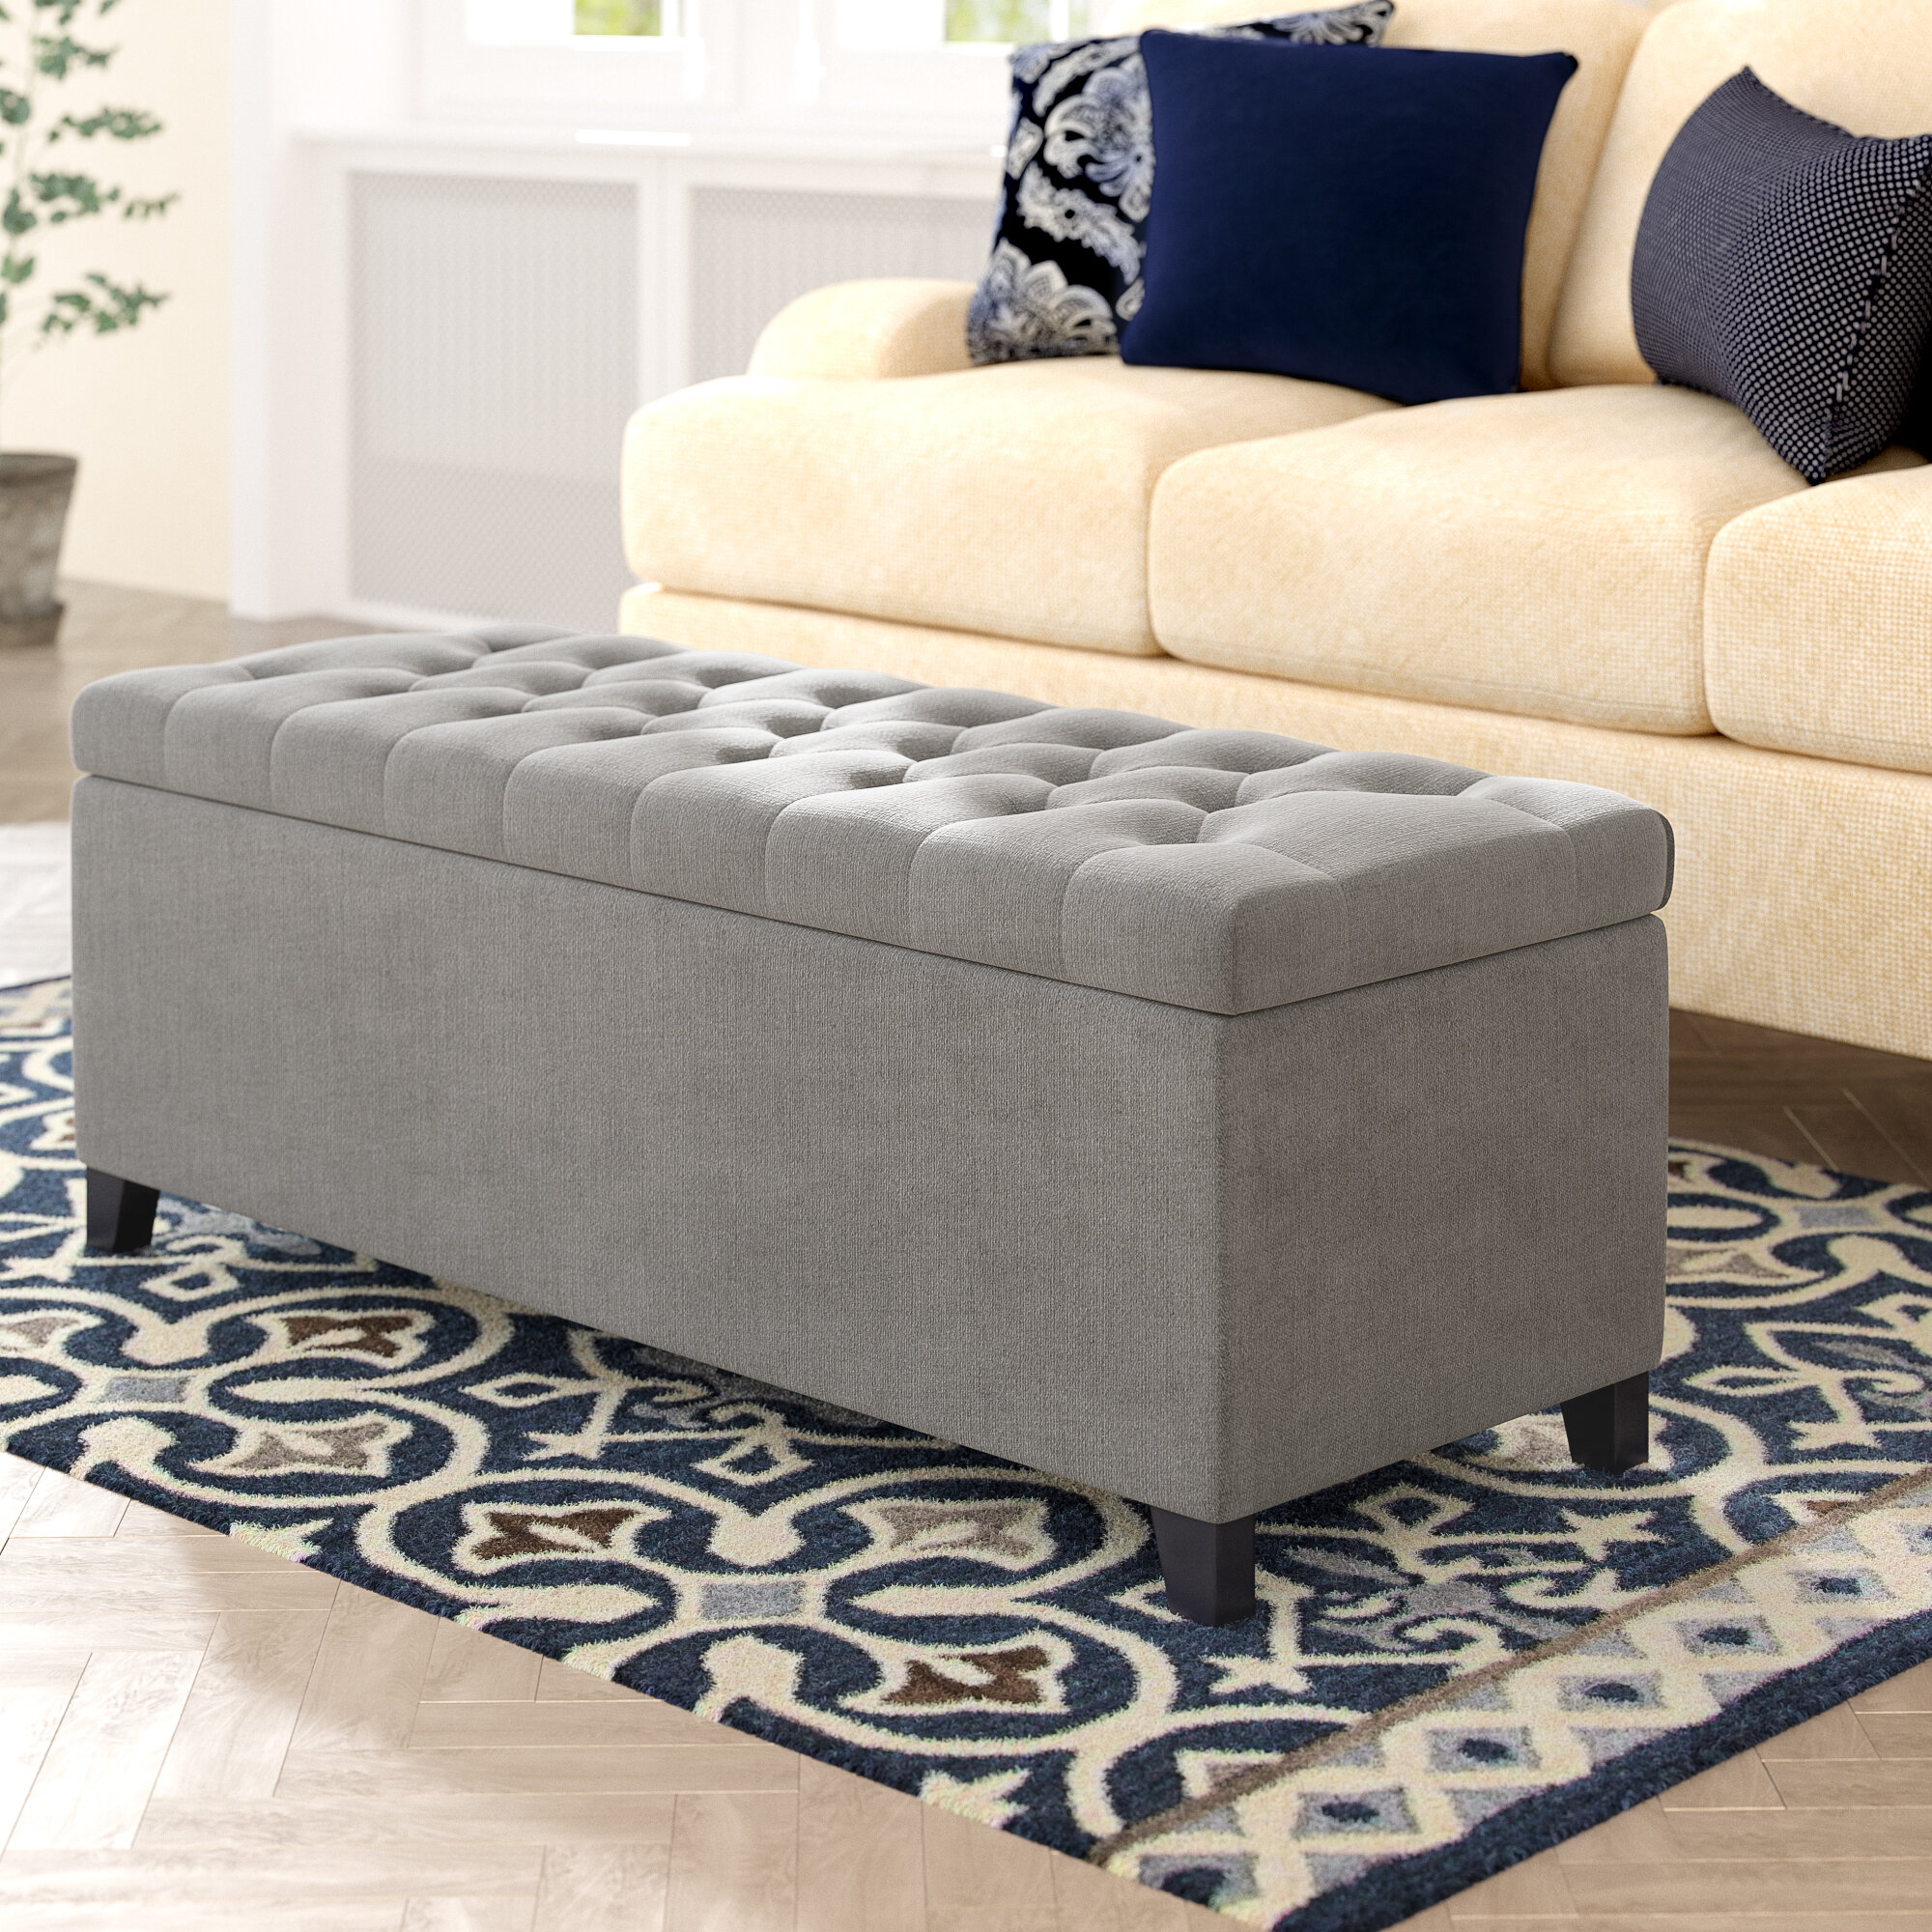 Frontgate Collette Tufted Storage Ottoman, 49% Off